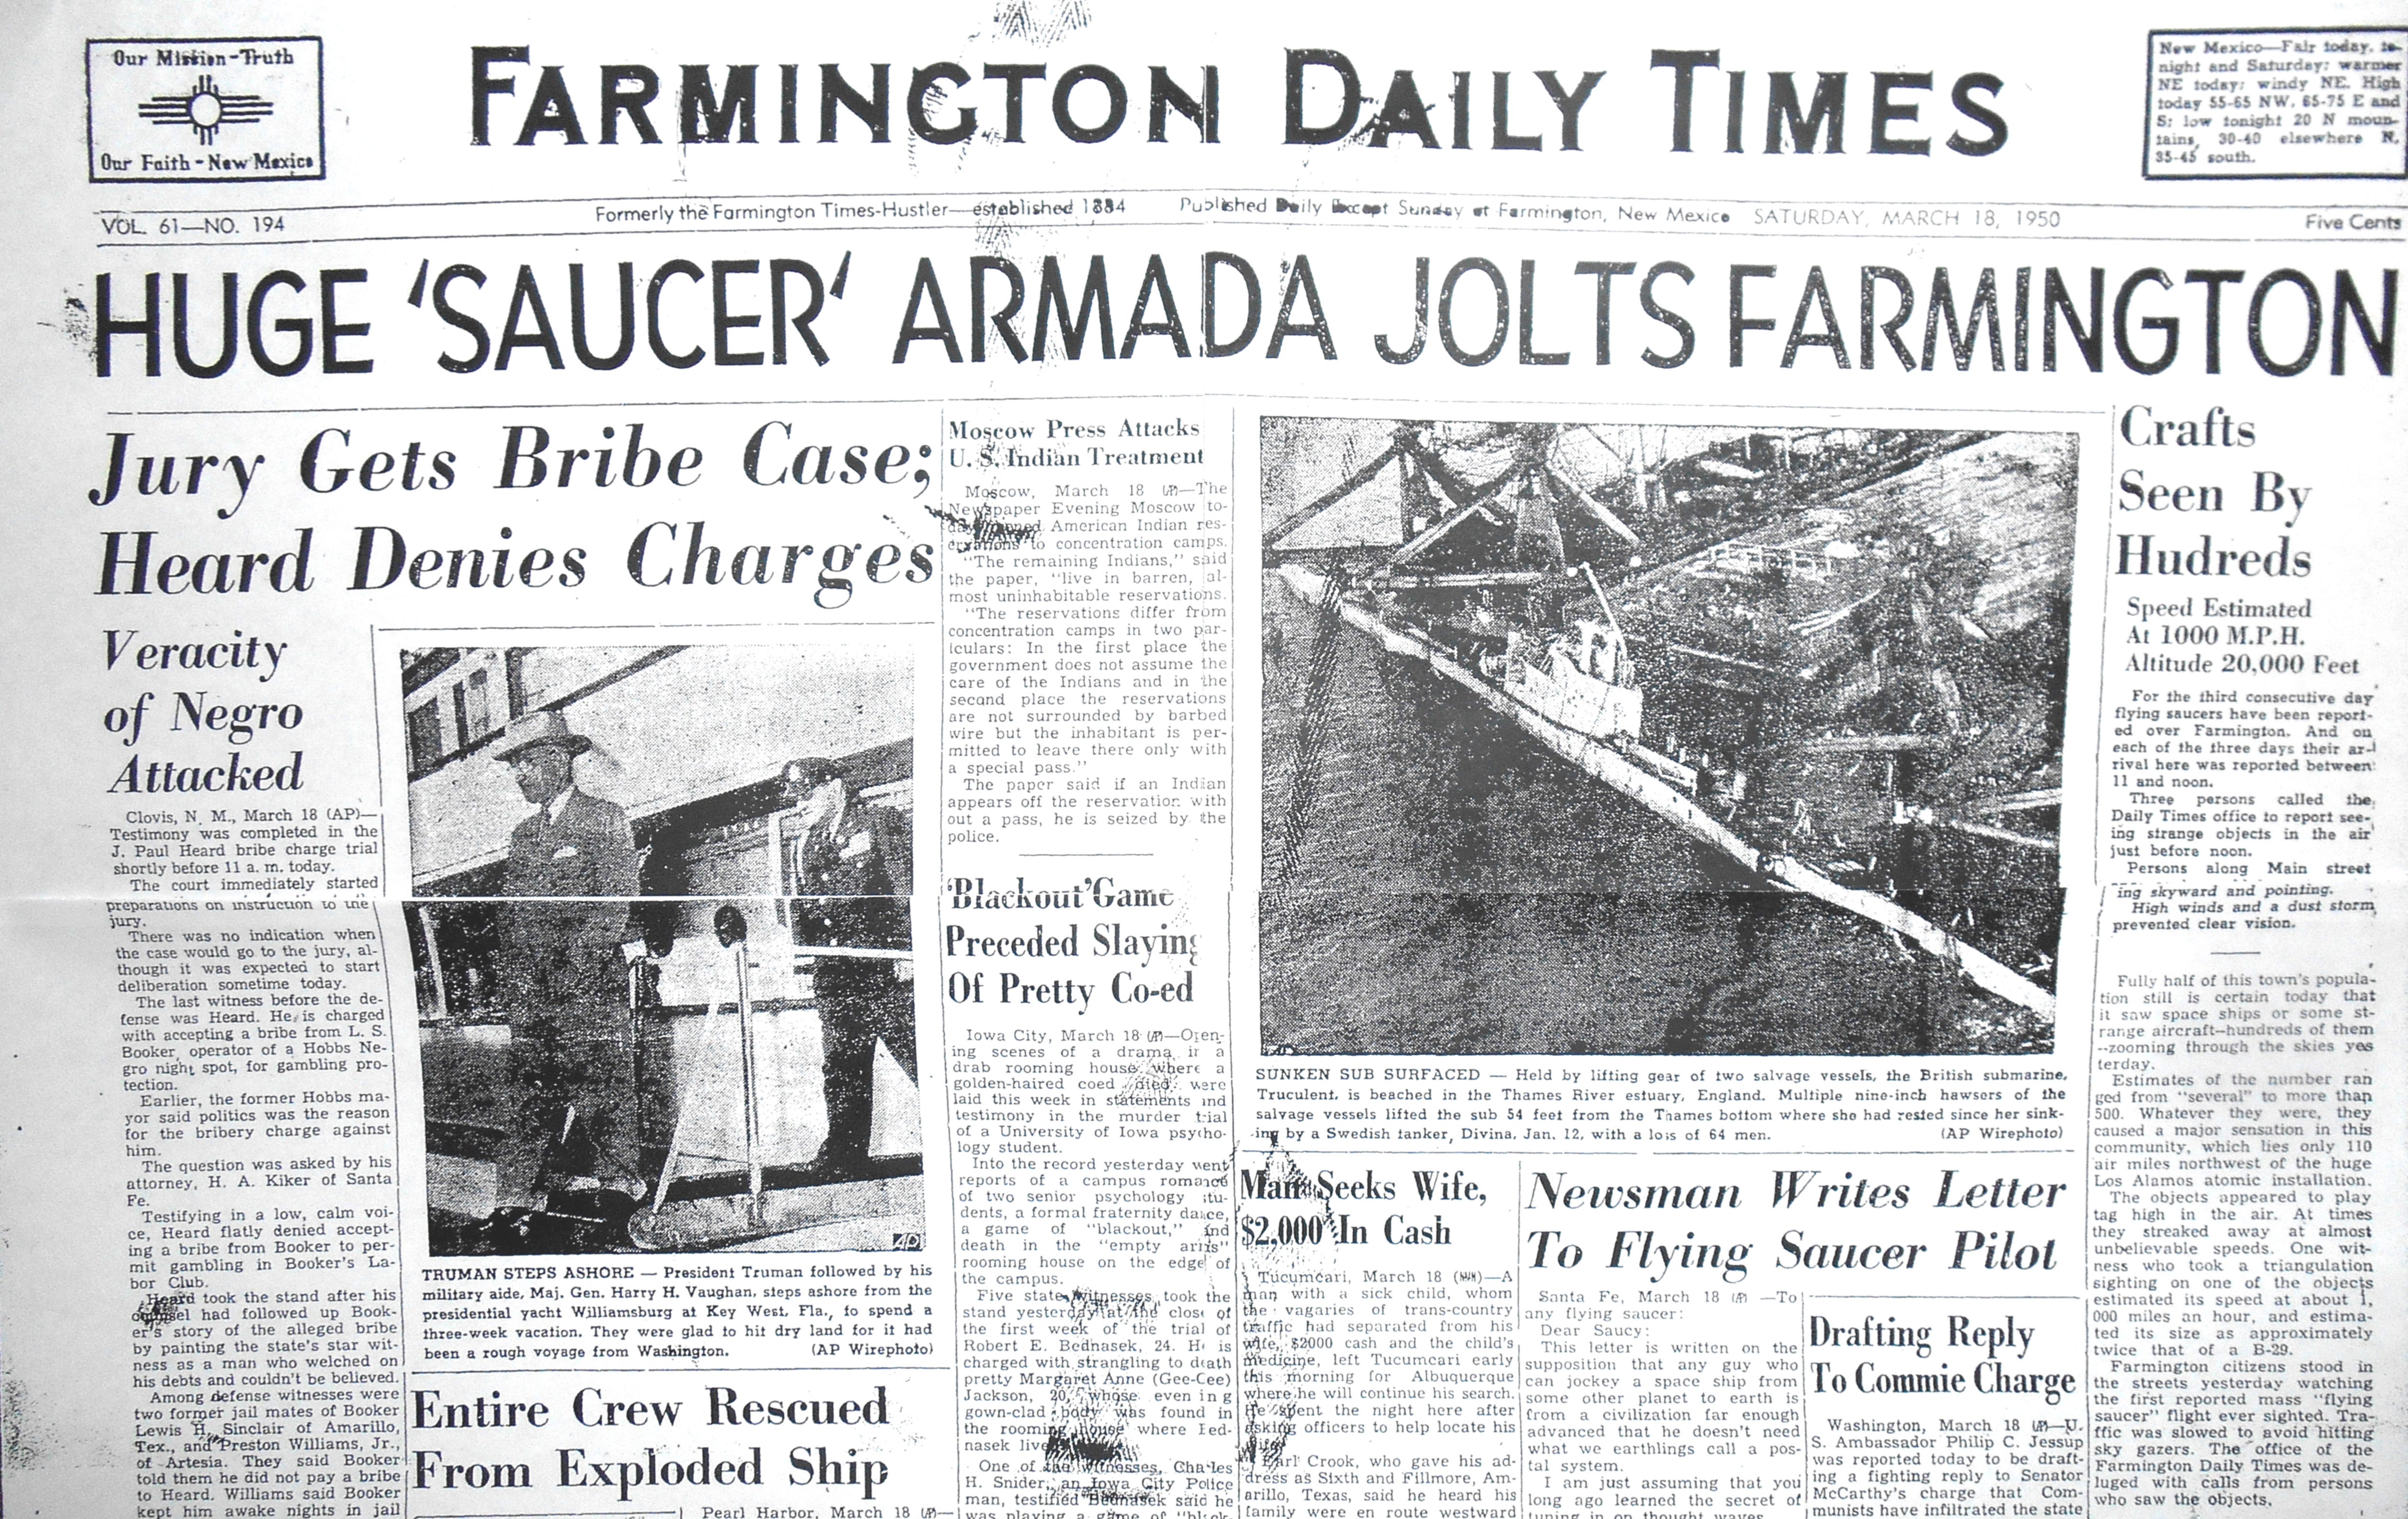 The front page of The Daily Times on March 18, 1950, chronicles the appearance of several strange objects in the sky above Farmington.